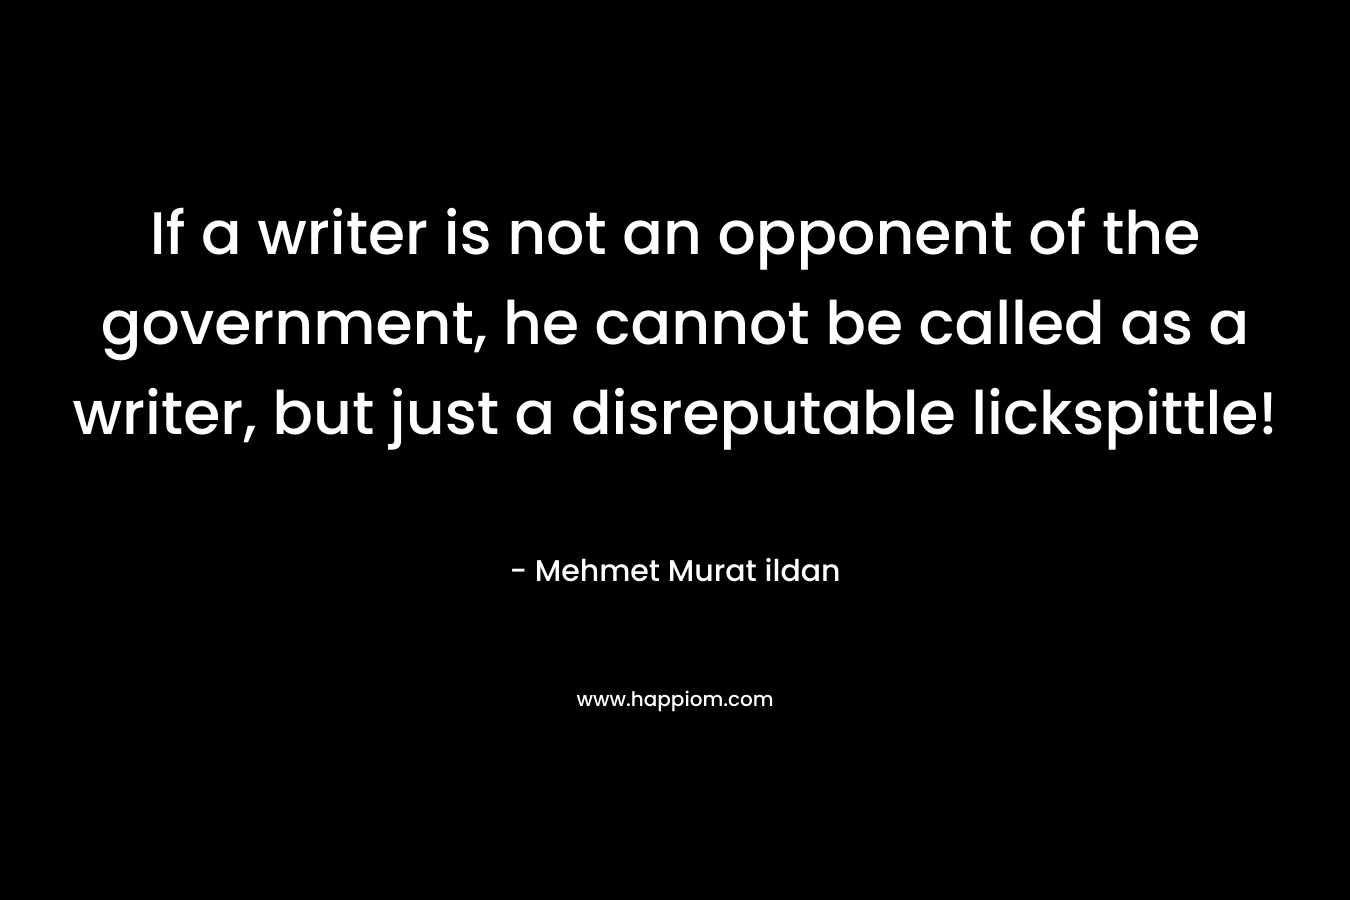 If a writer is not an opponent of the government, he cannot be called as a writer, but just a disreputable lickspittle!